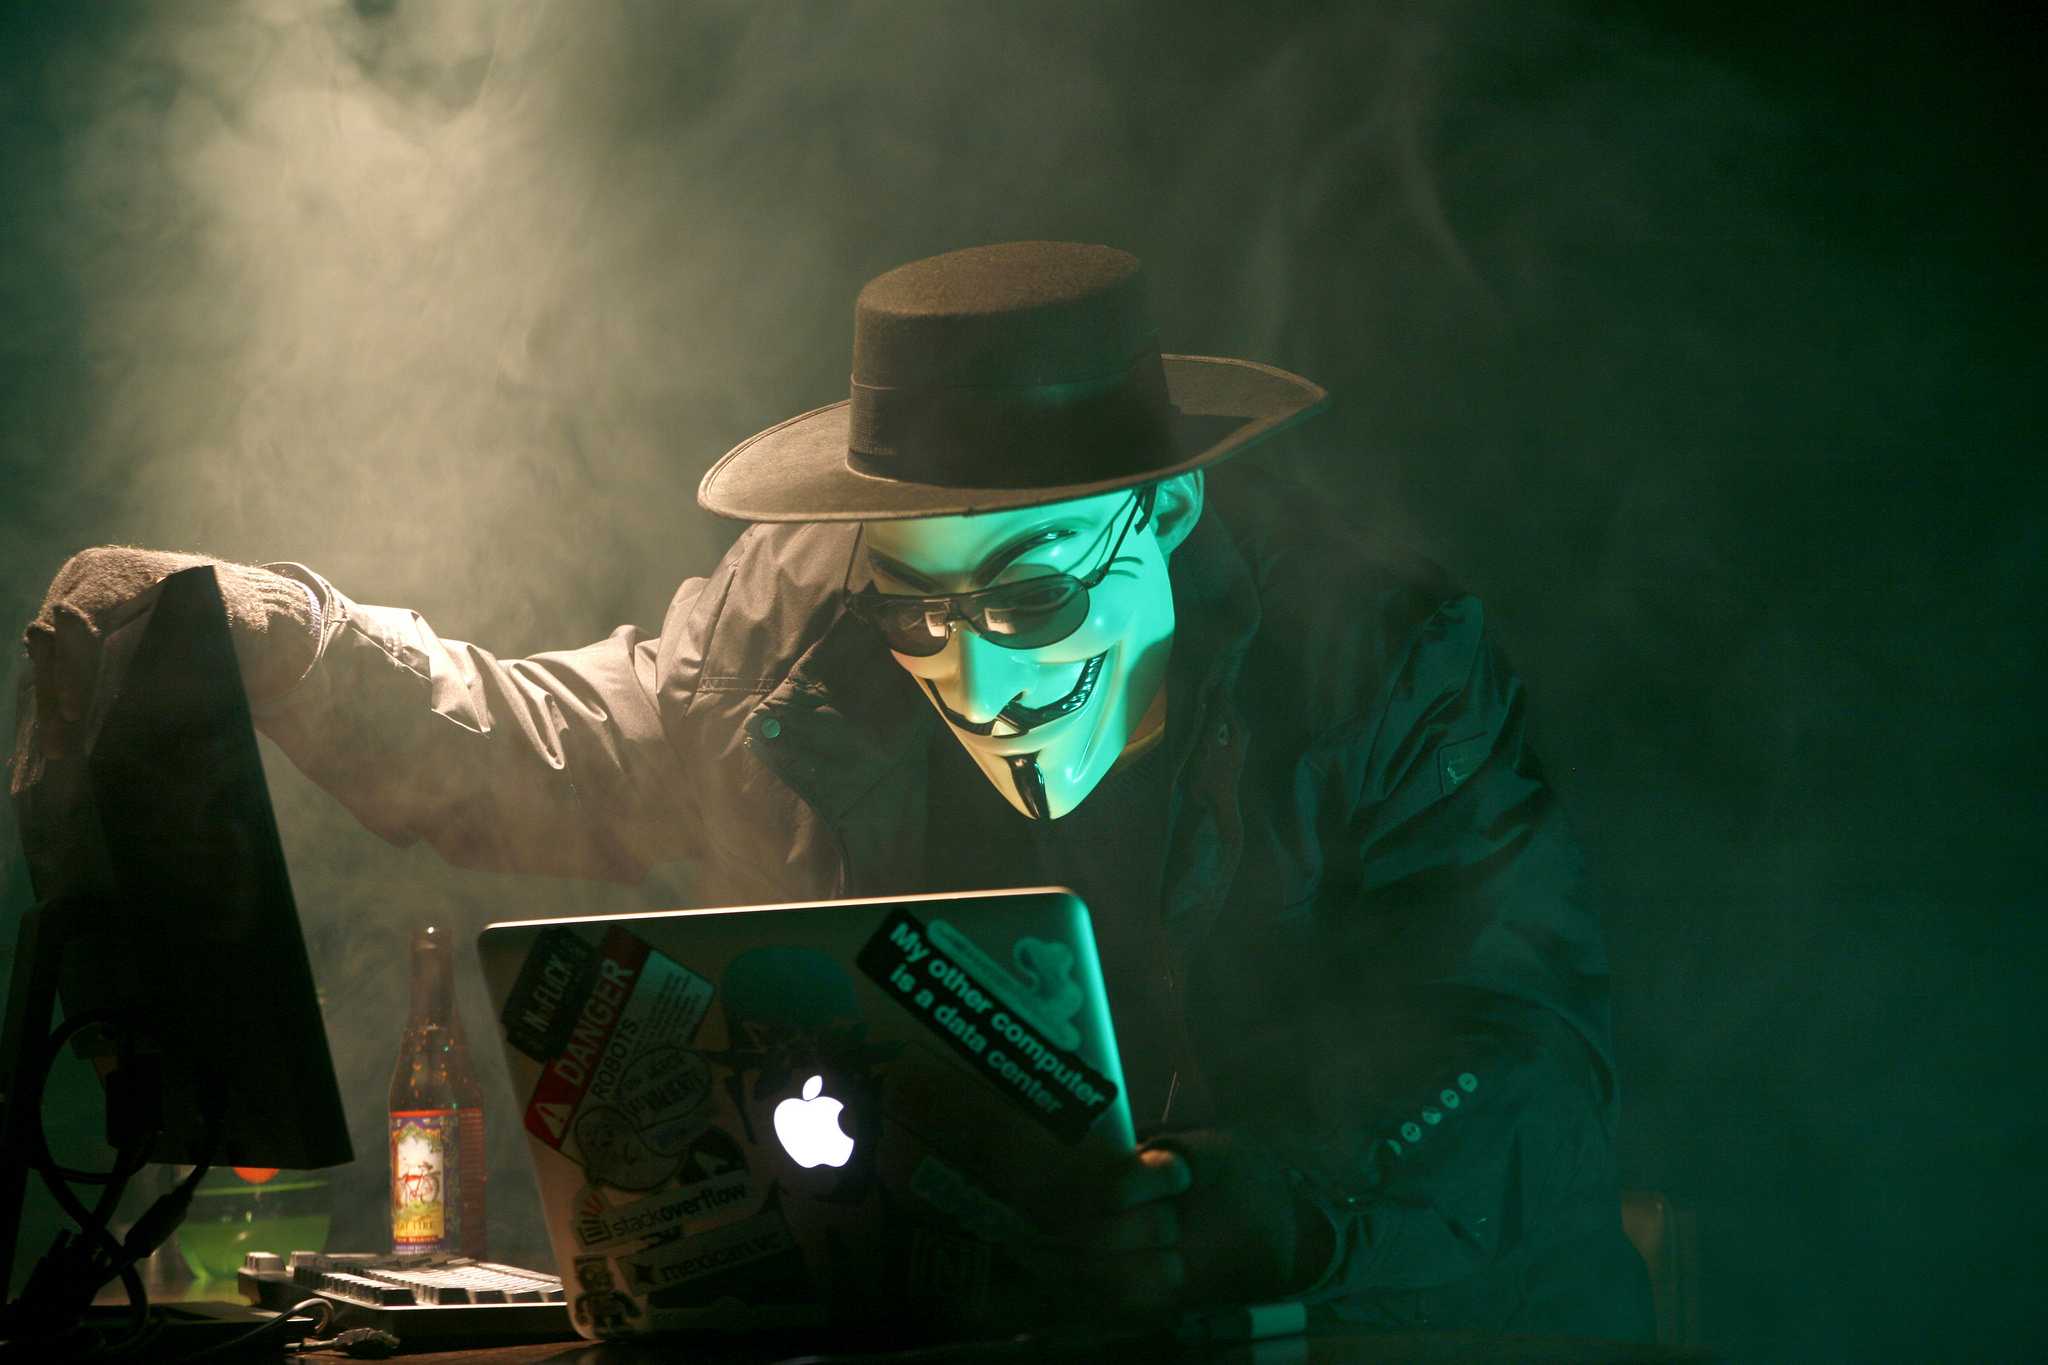 A person in a dark hat and trench coat peers down at two computer monitors. They are wearing a white mask, hiding their identity. The room is dark, and smoke floats in the air.